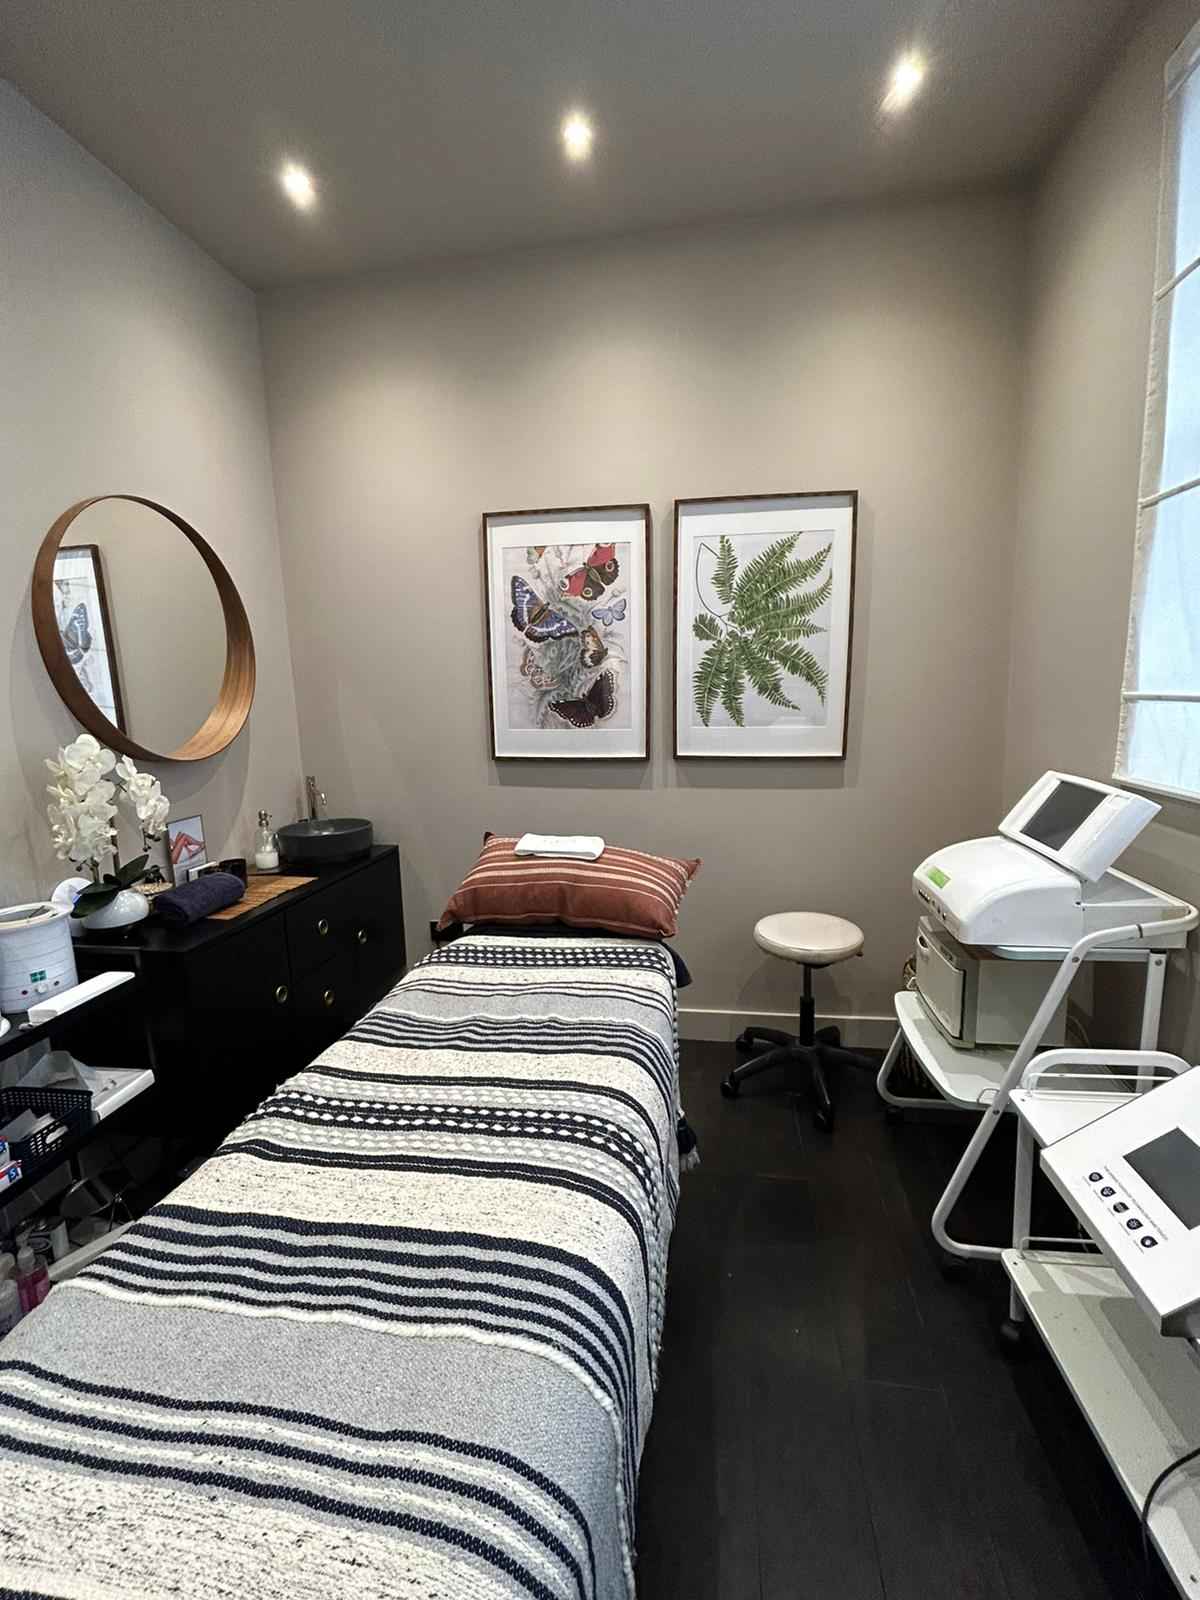  A modern beauty treatment room with patterned boho towelling on massage bed, featuring two jungle inspired prints on the wall behind. 